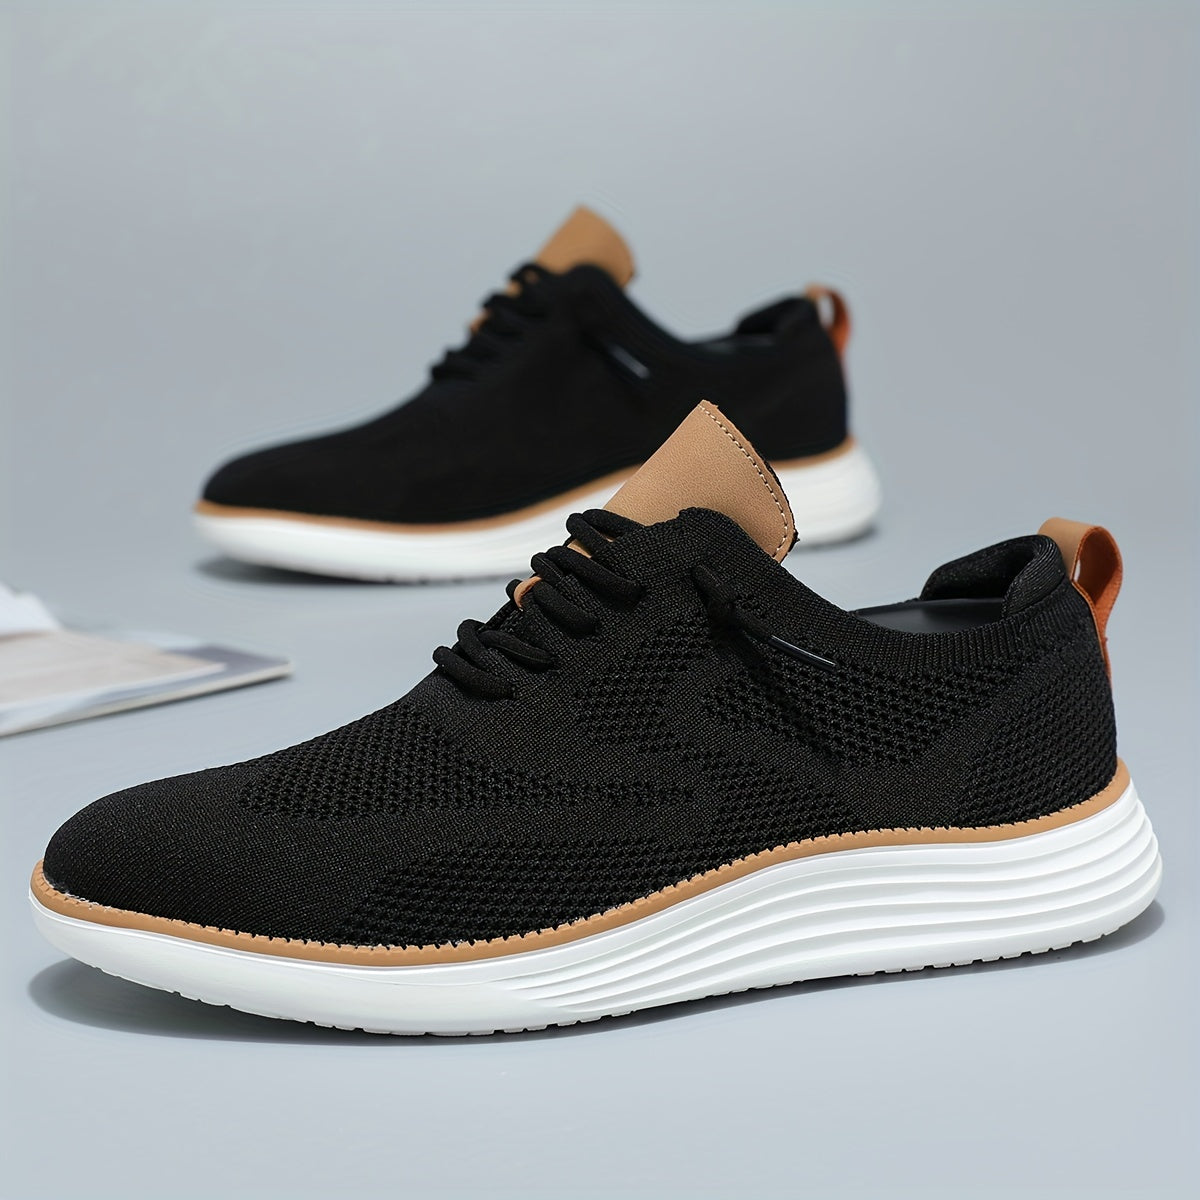 Men's Lightweight Athletic Sneakers, Breathable